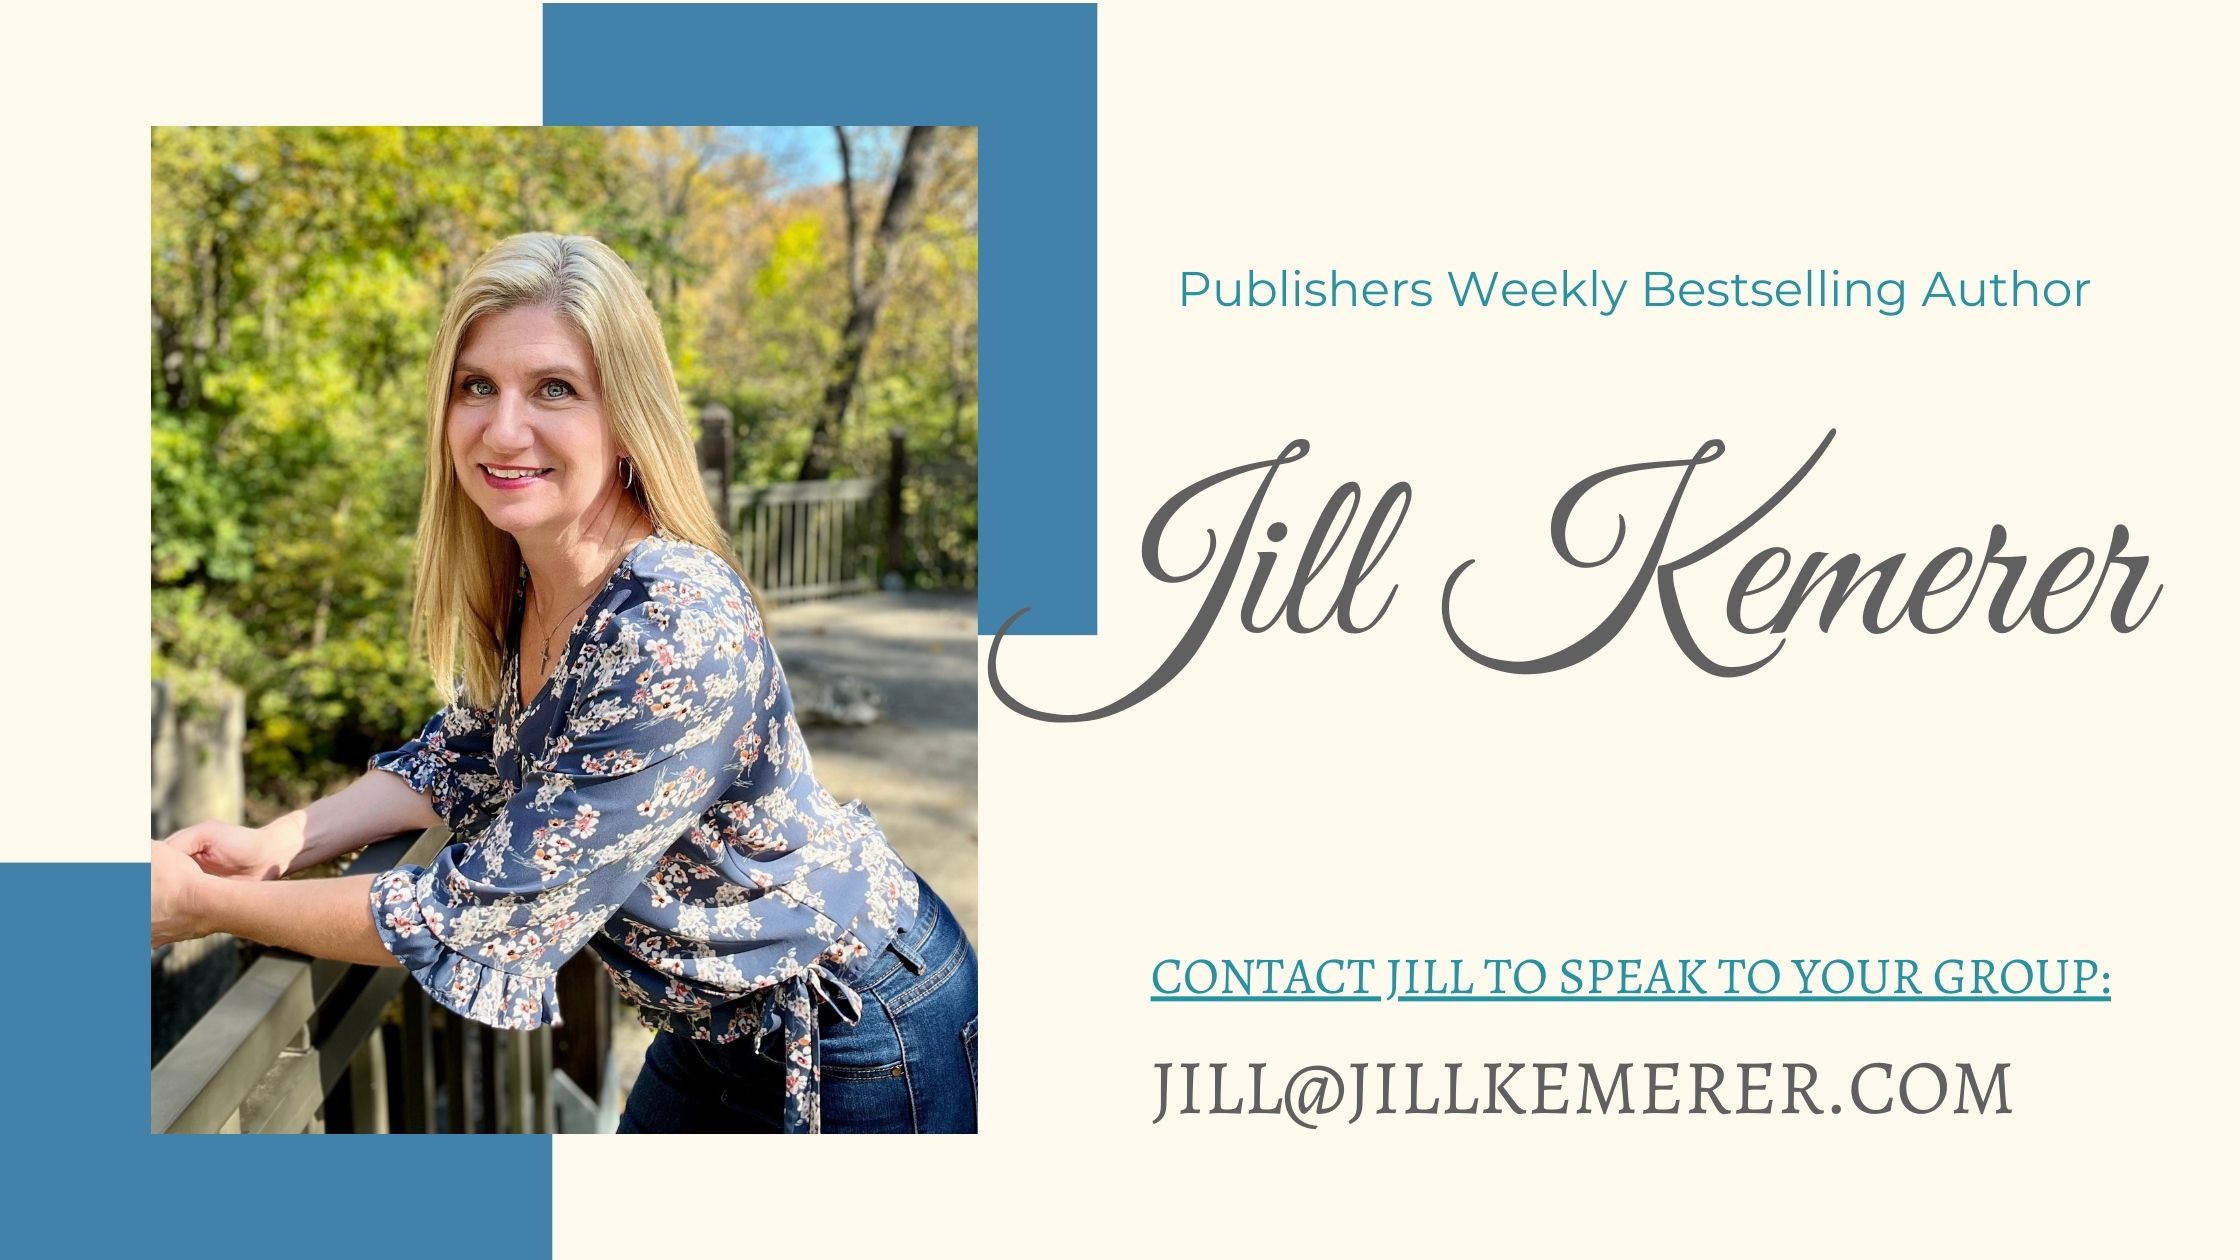 Jill Kemerer author photo with cream and blue background. Text "Publisher's Weekly Bestselling Author jill Kemerer. Contact Jill to speak to your group."